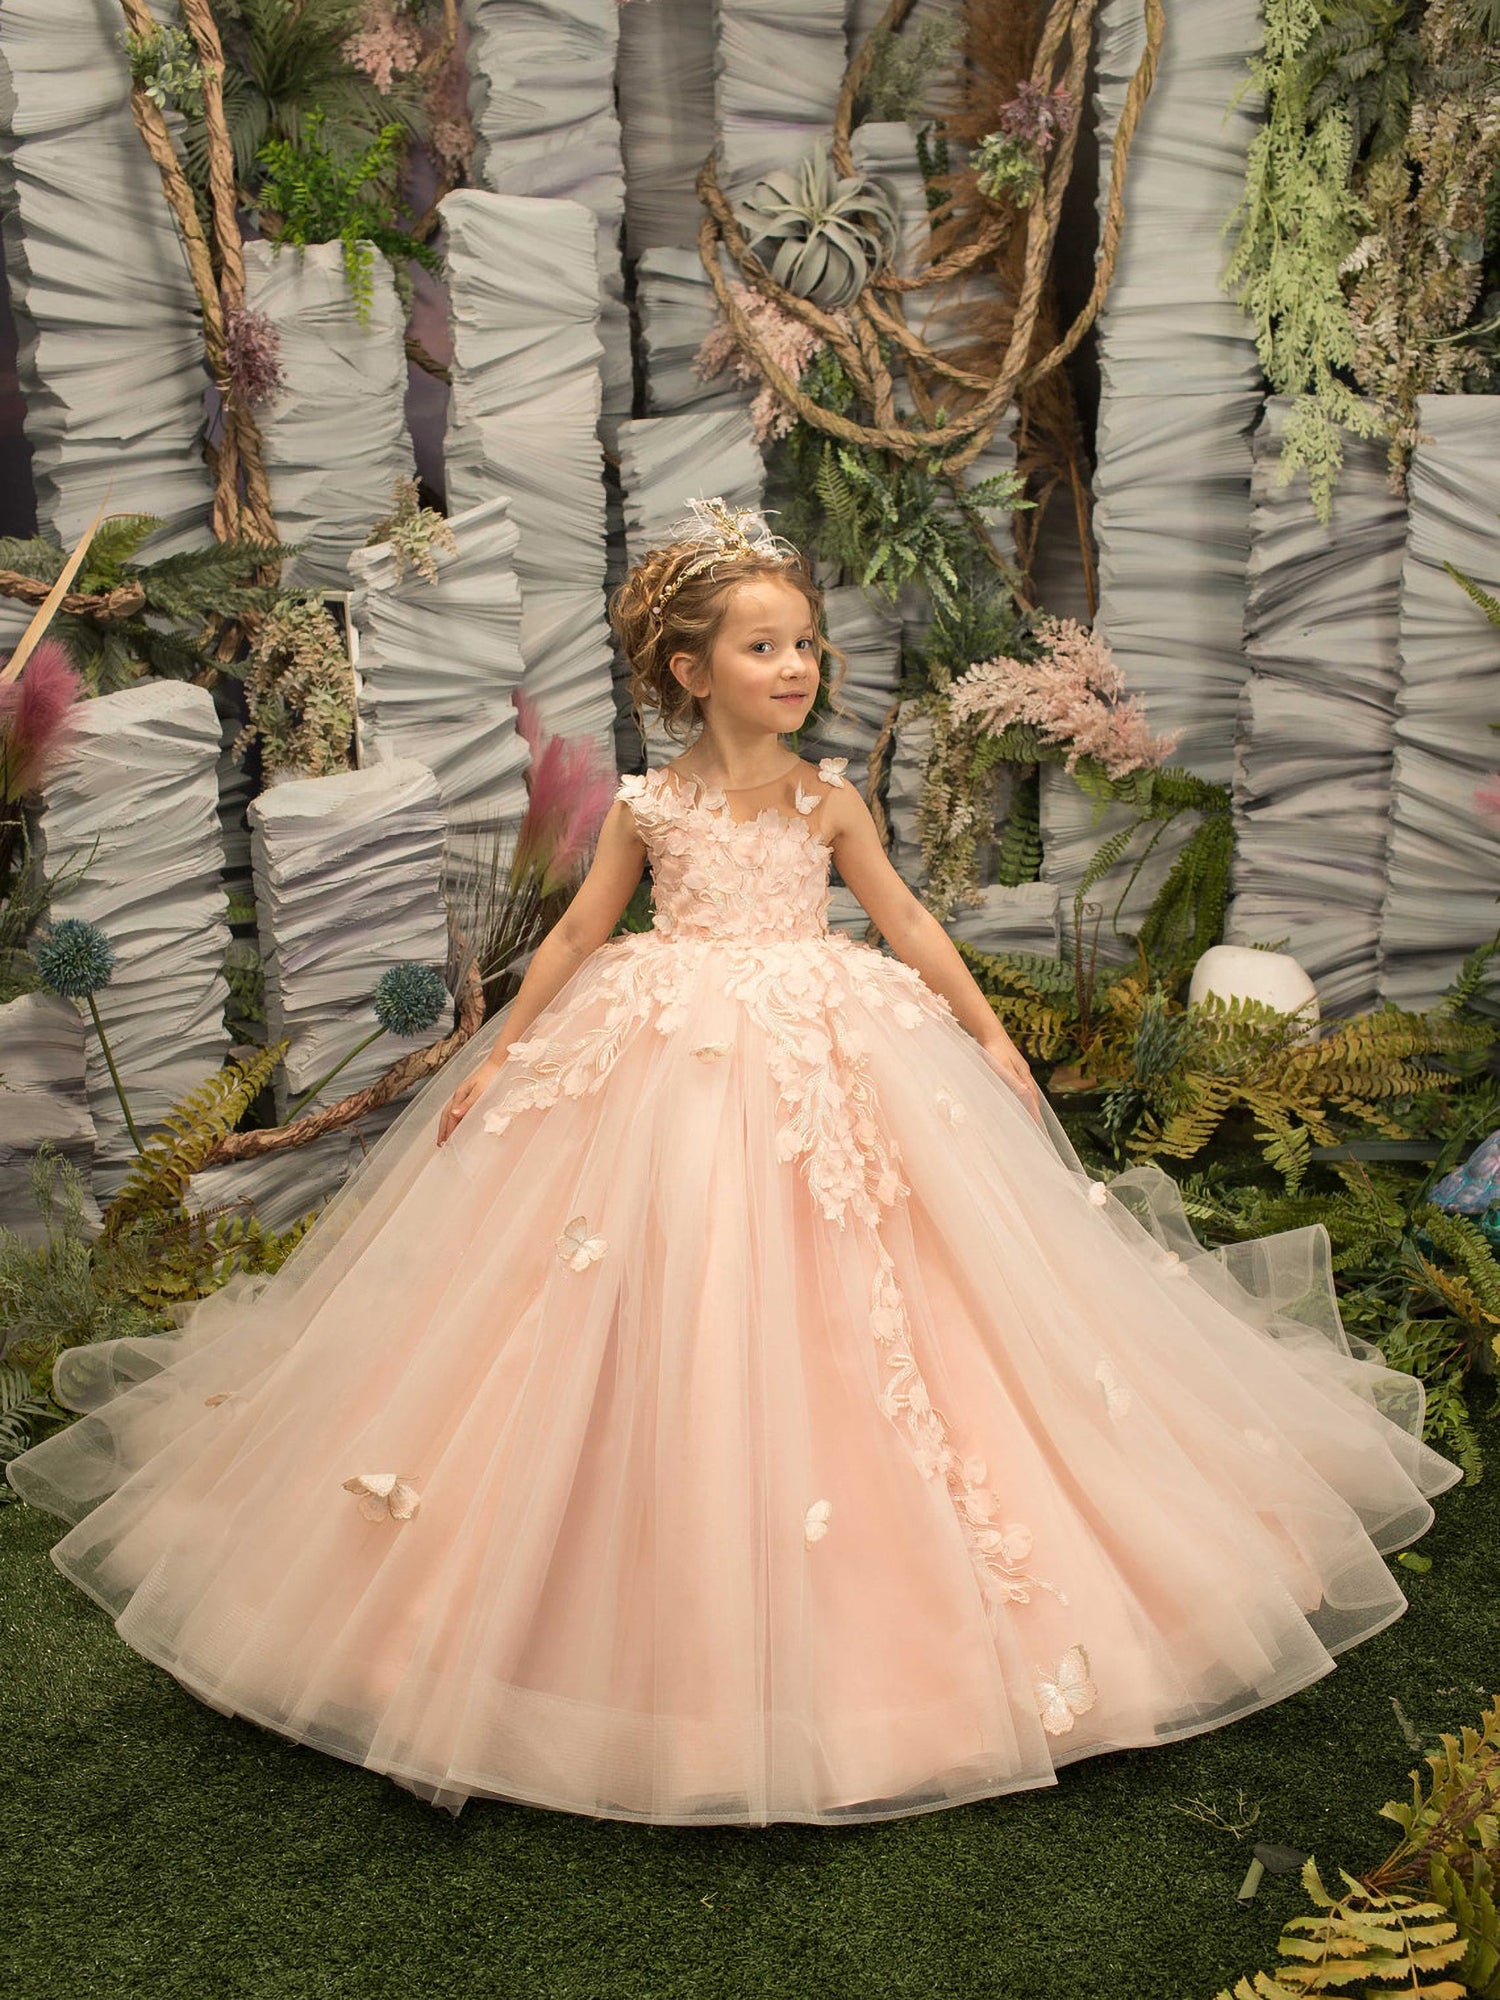 Bellasprom Beautiful Sleeveless A-line Flower Girl Dress Tulle with Appliques Lace Bellasprom